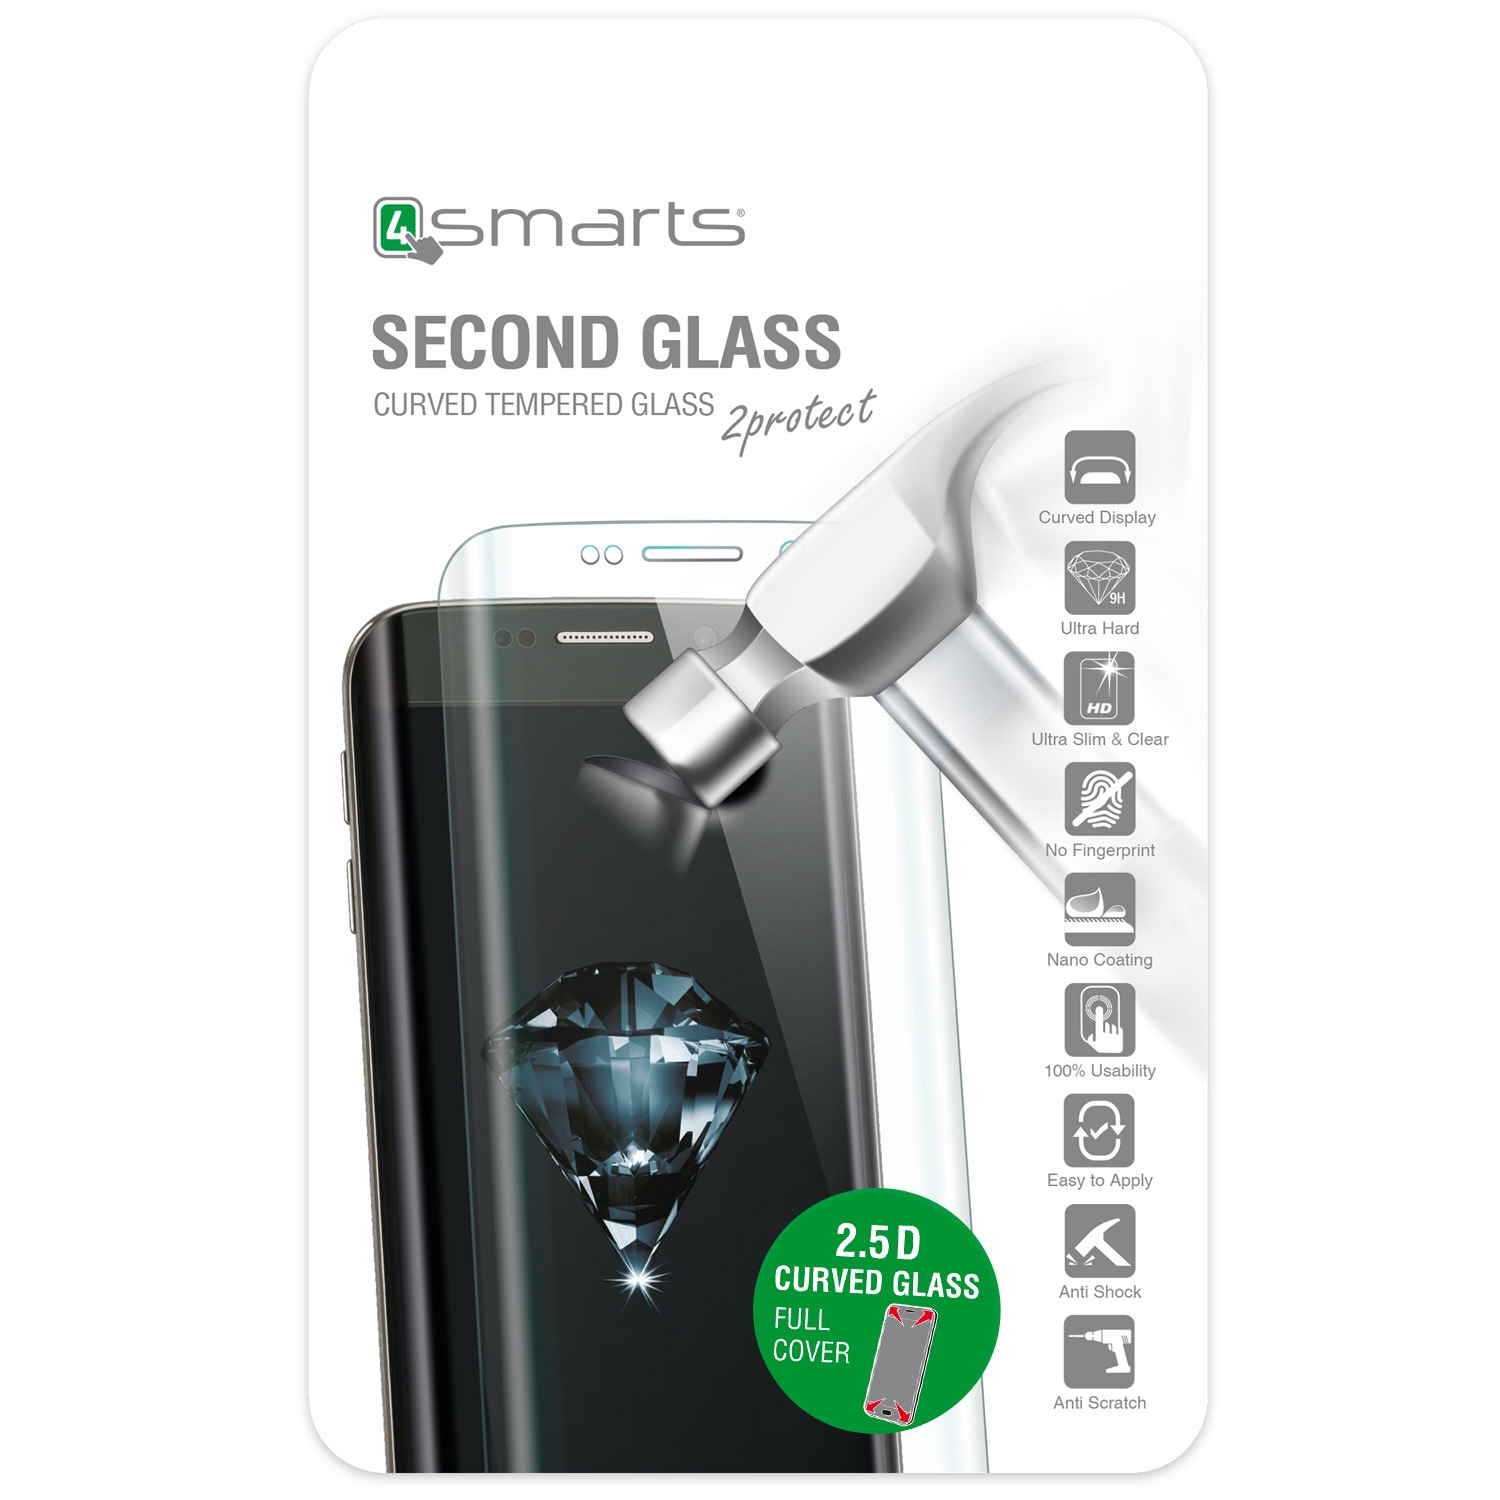 4smarts Second Glass Curved 2.5D till iPhone 6/6s Plus - Vit